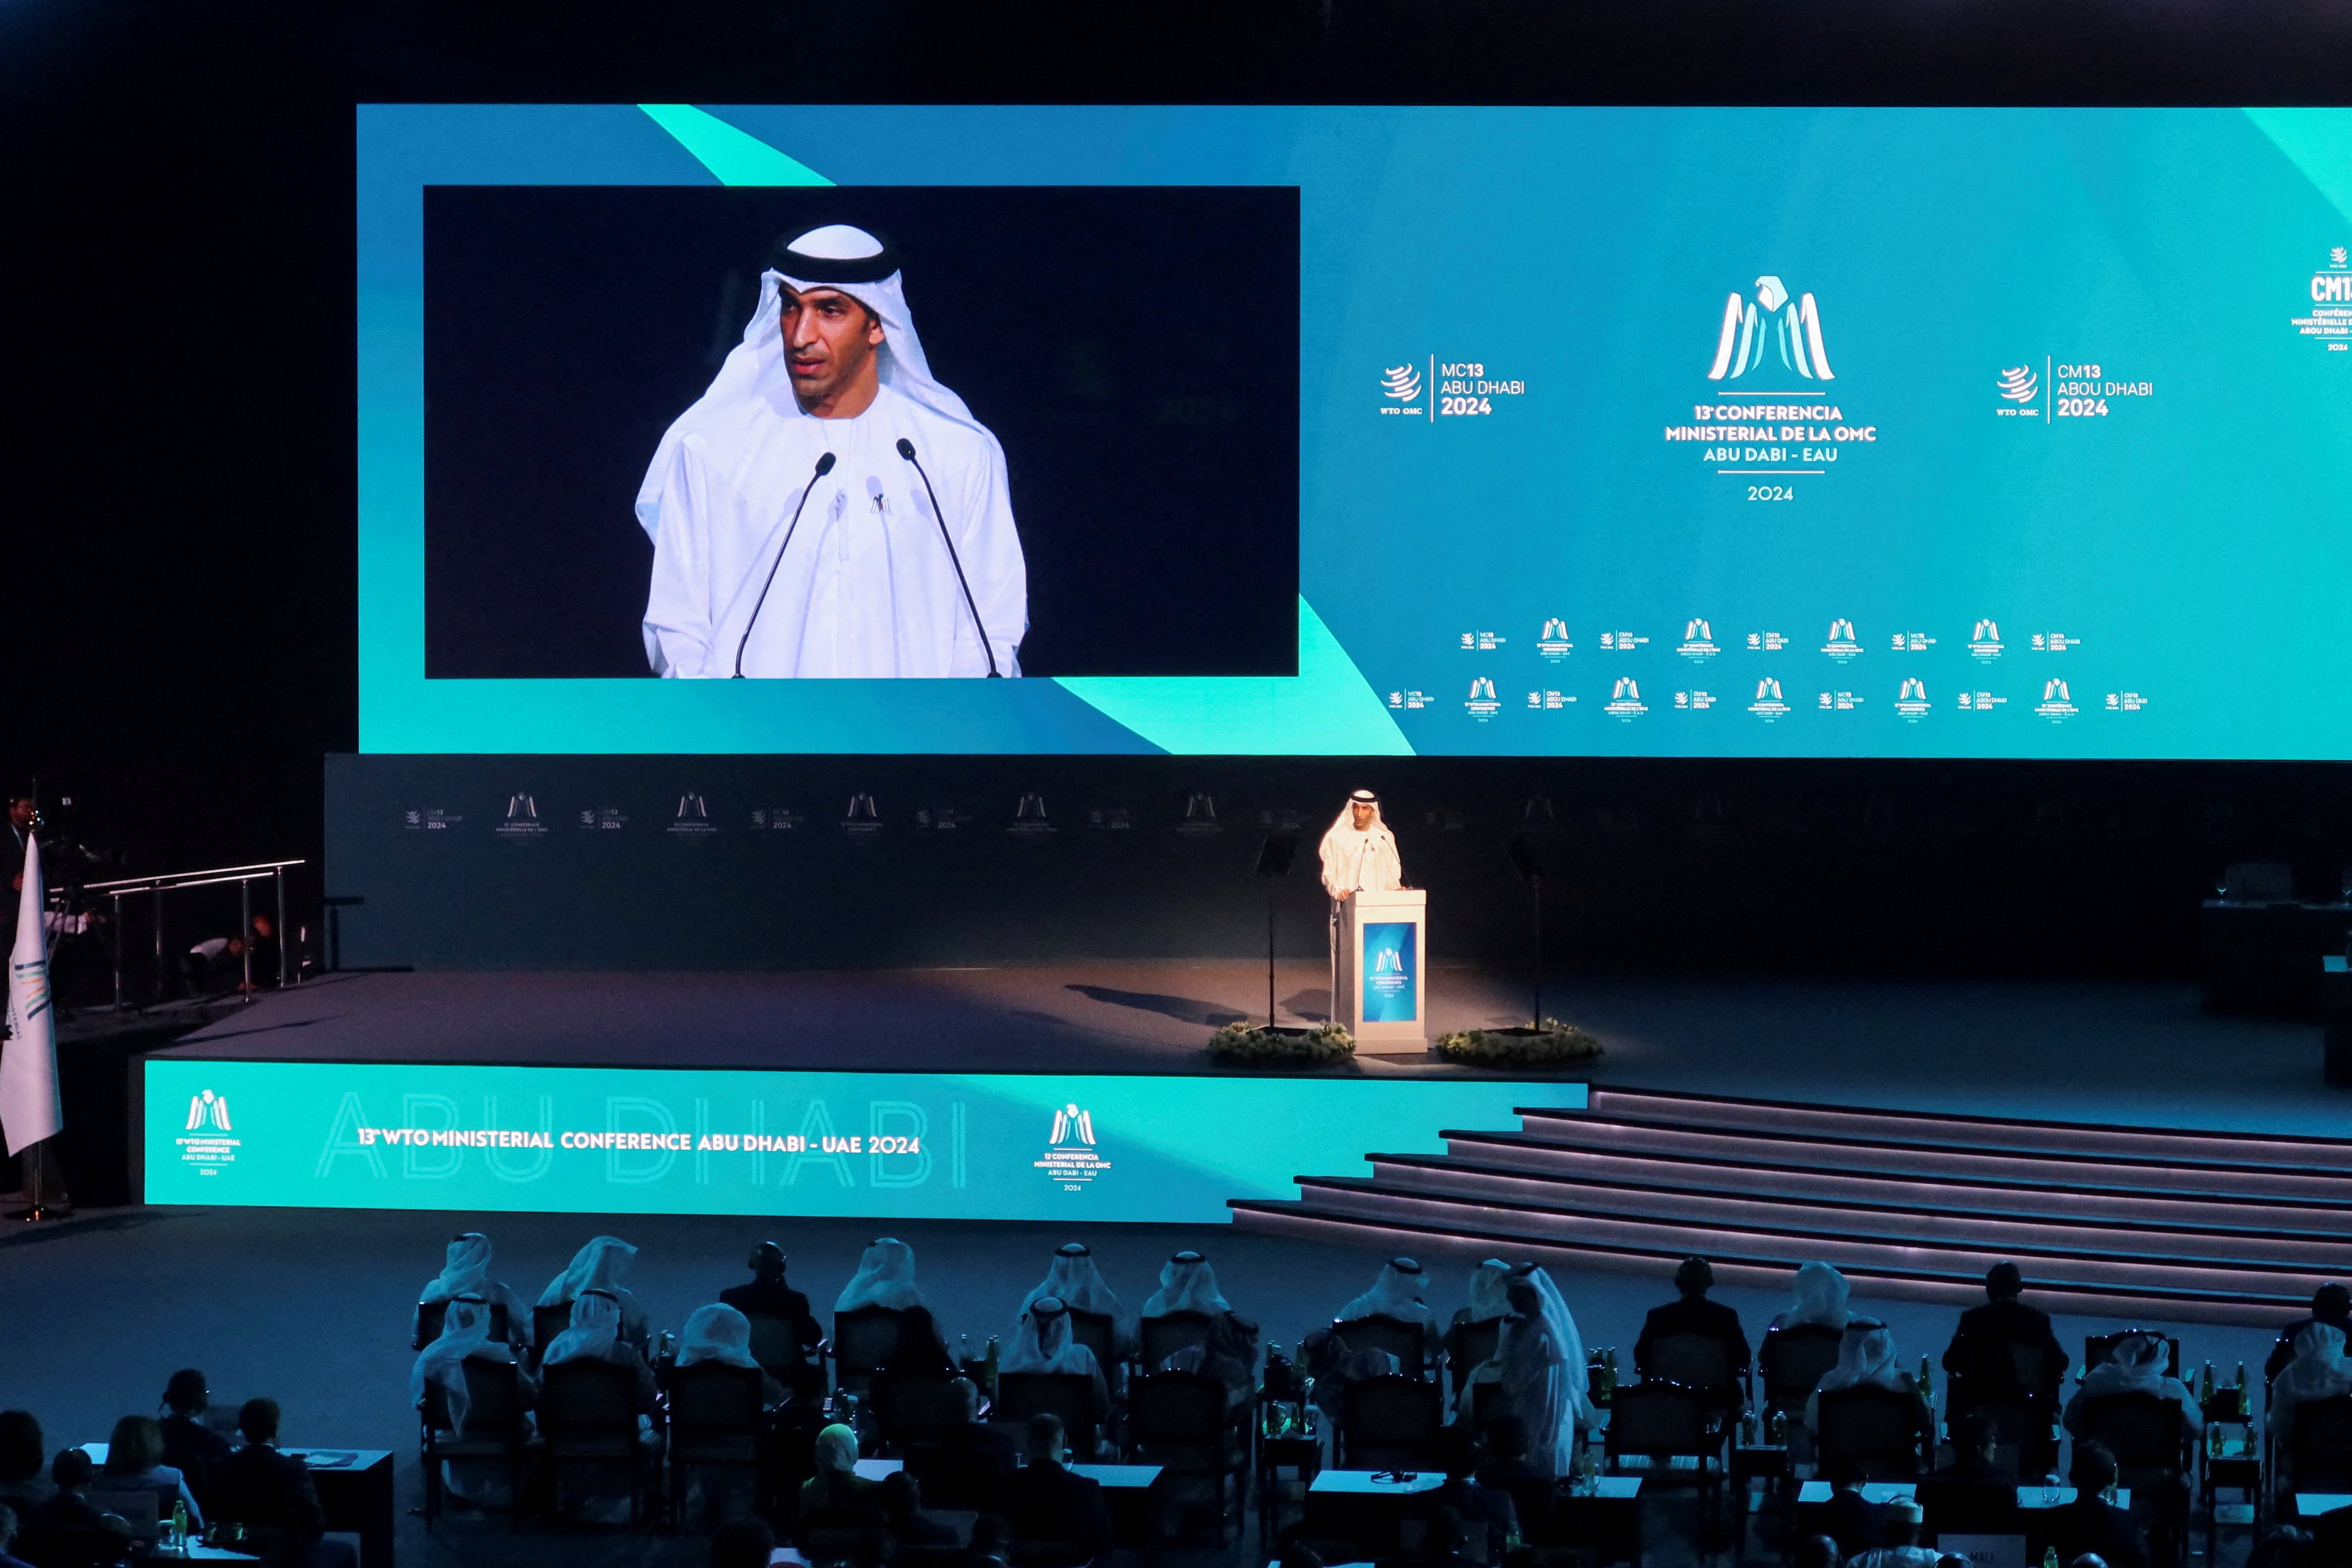 UAE Minister of Foreign Trade Thani Al Zeyoudi speaks during the opening ceremony of the WTO ministerial meeting in Abu Dhabi on Monday. Photo: Reuters